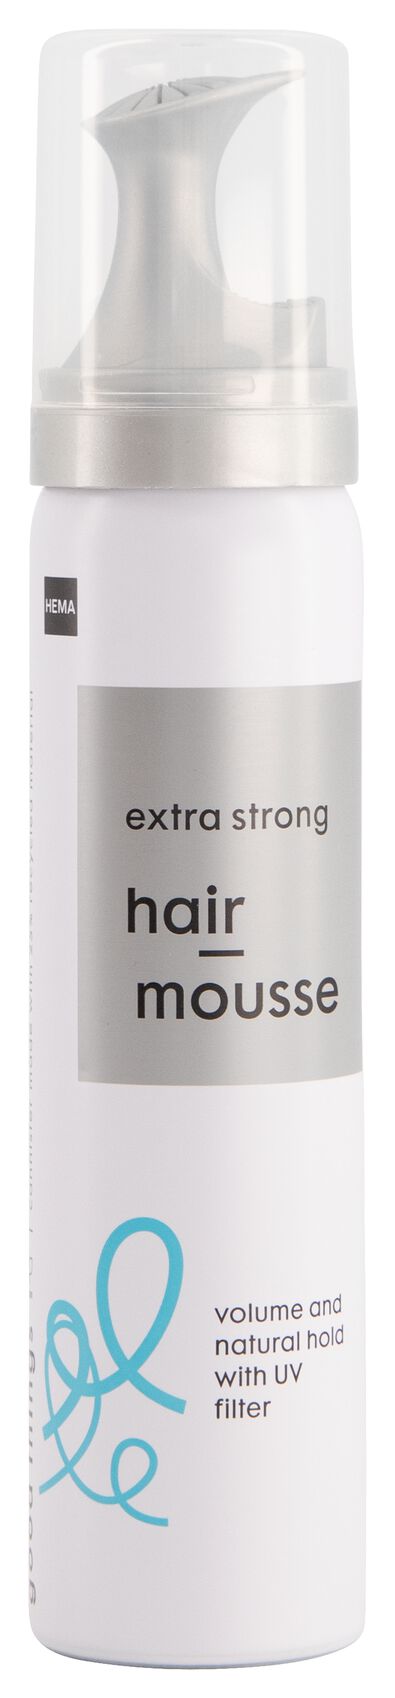 mousse cheveux extra forte 75 ml - 11077106 - HEMA